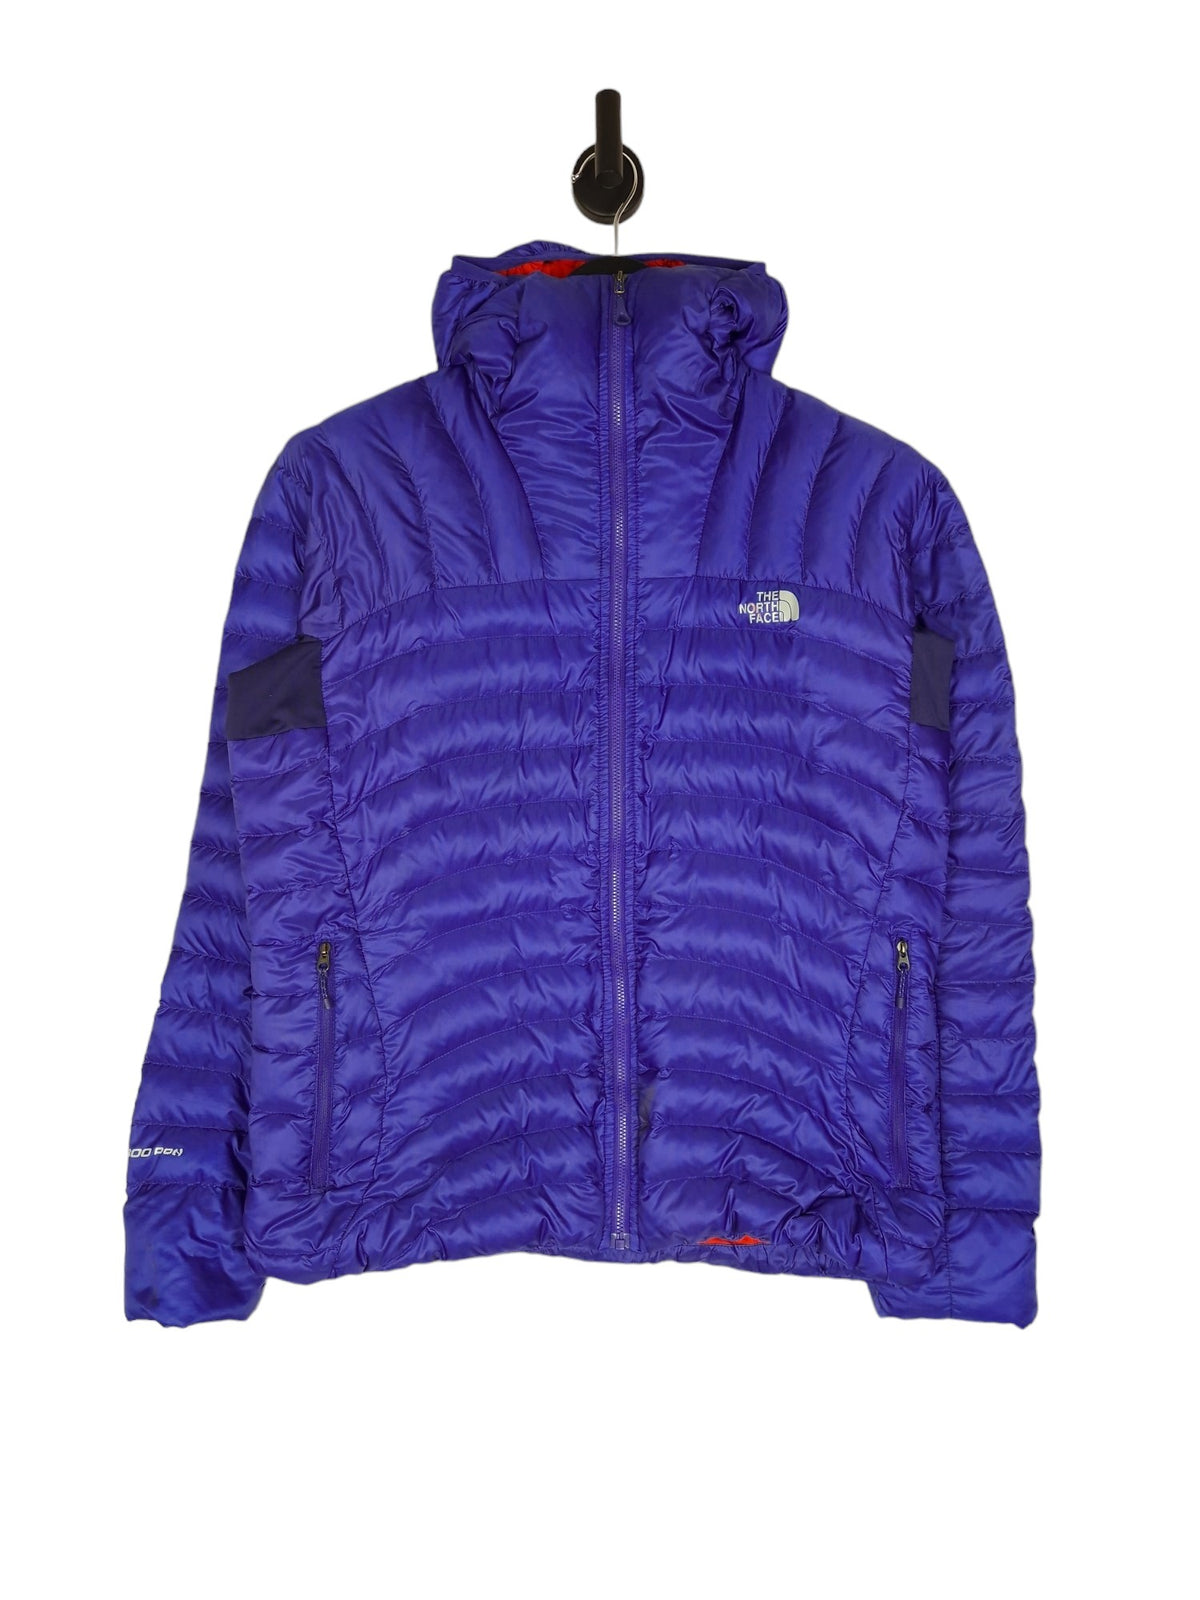 The North Face 800 Pro Puffer Jacket - Size  L UK 12